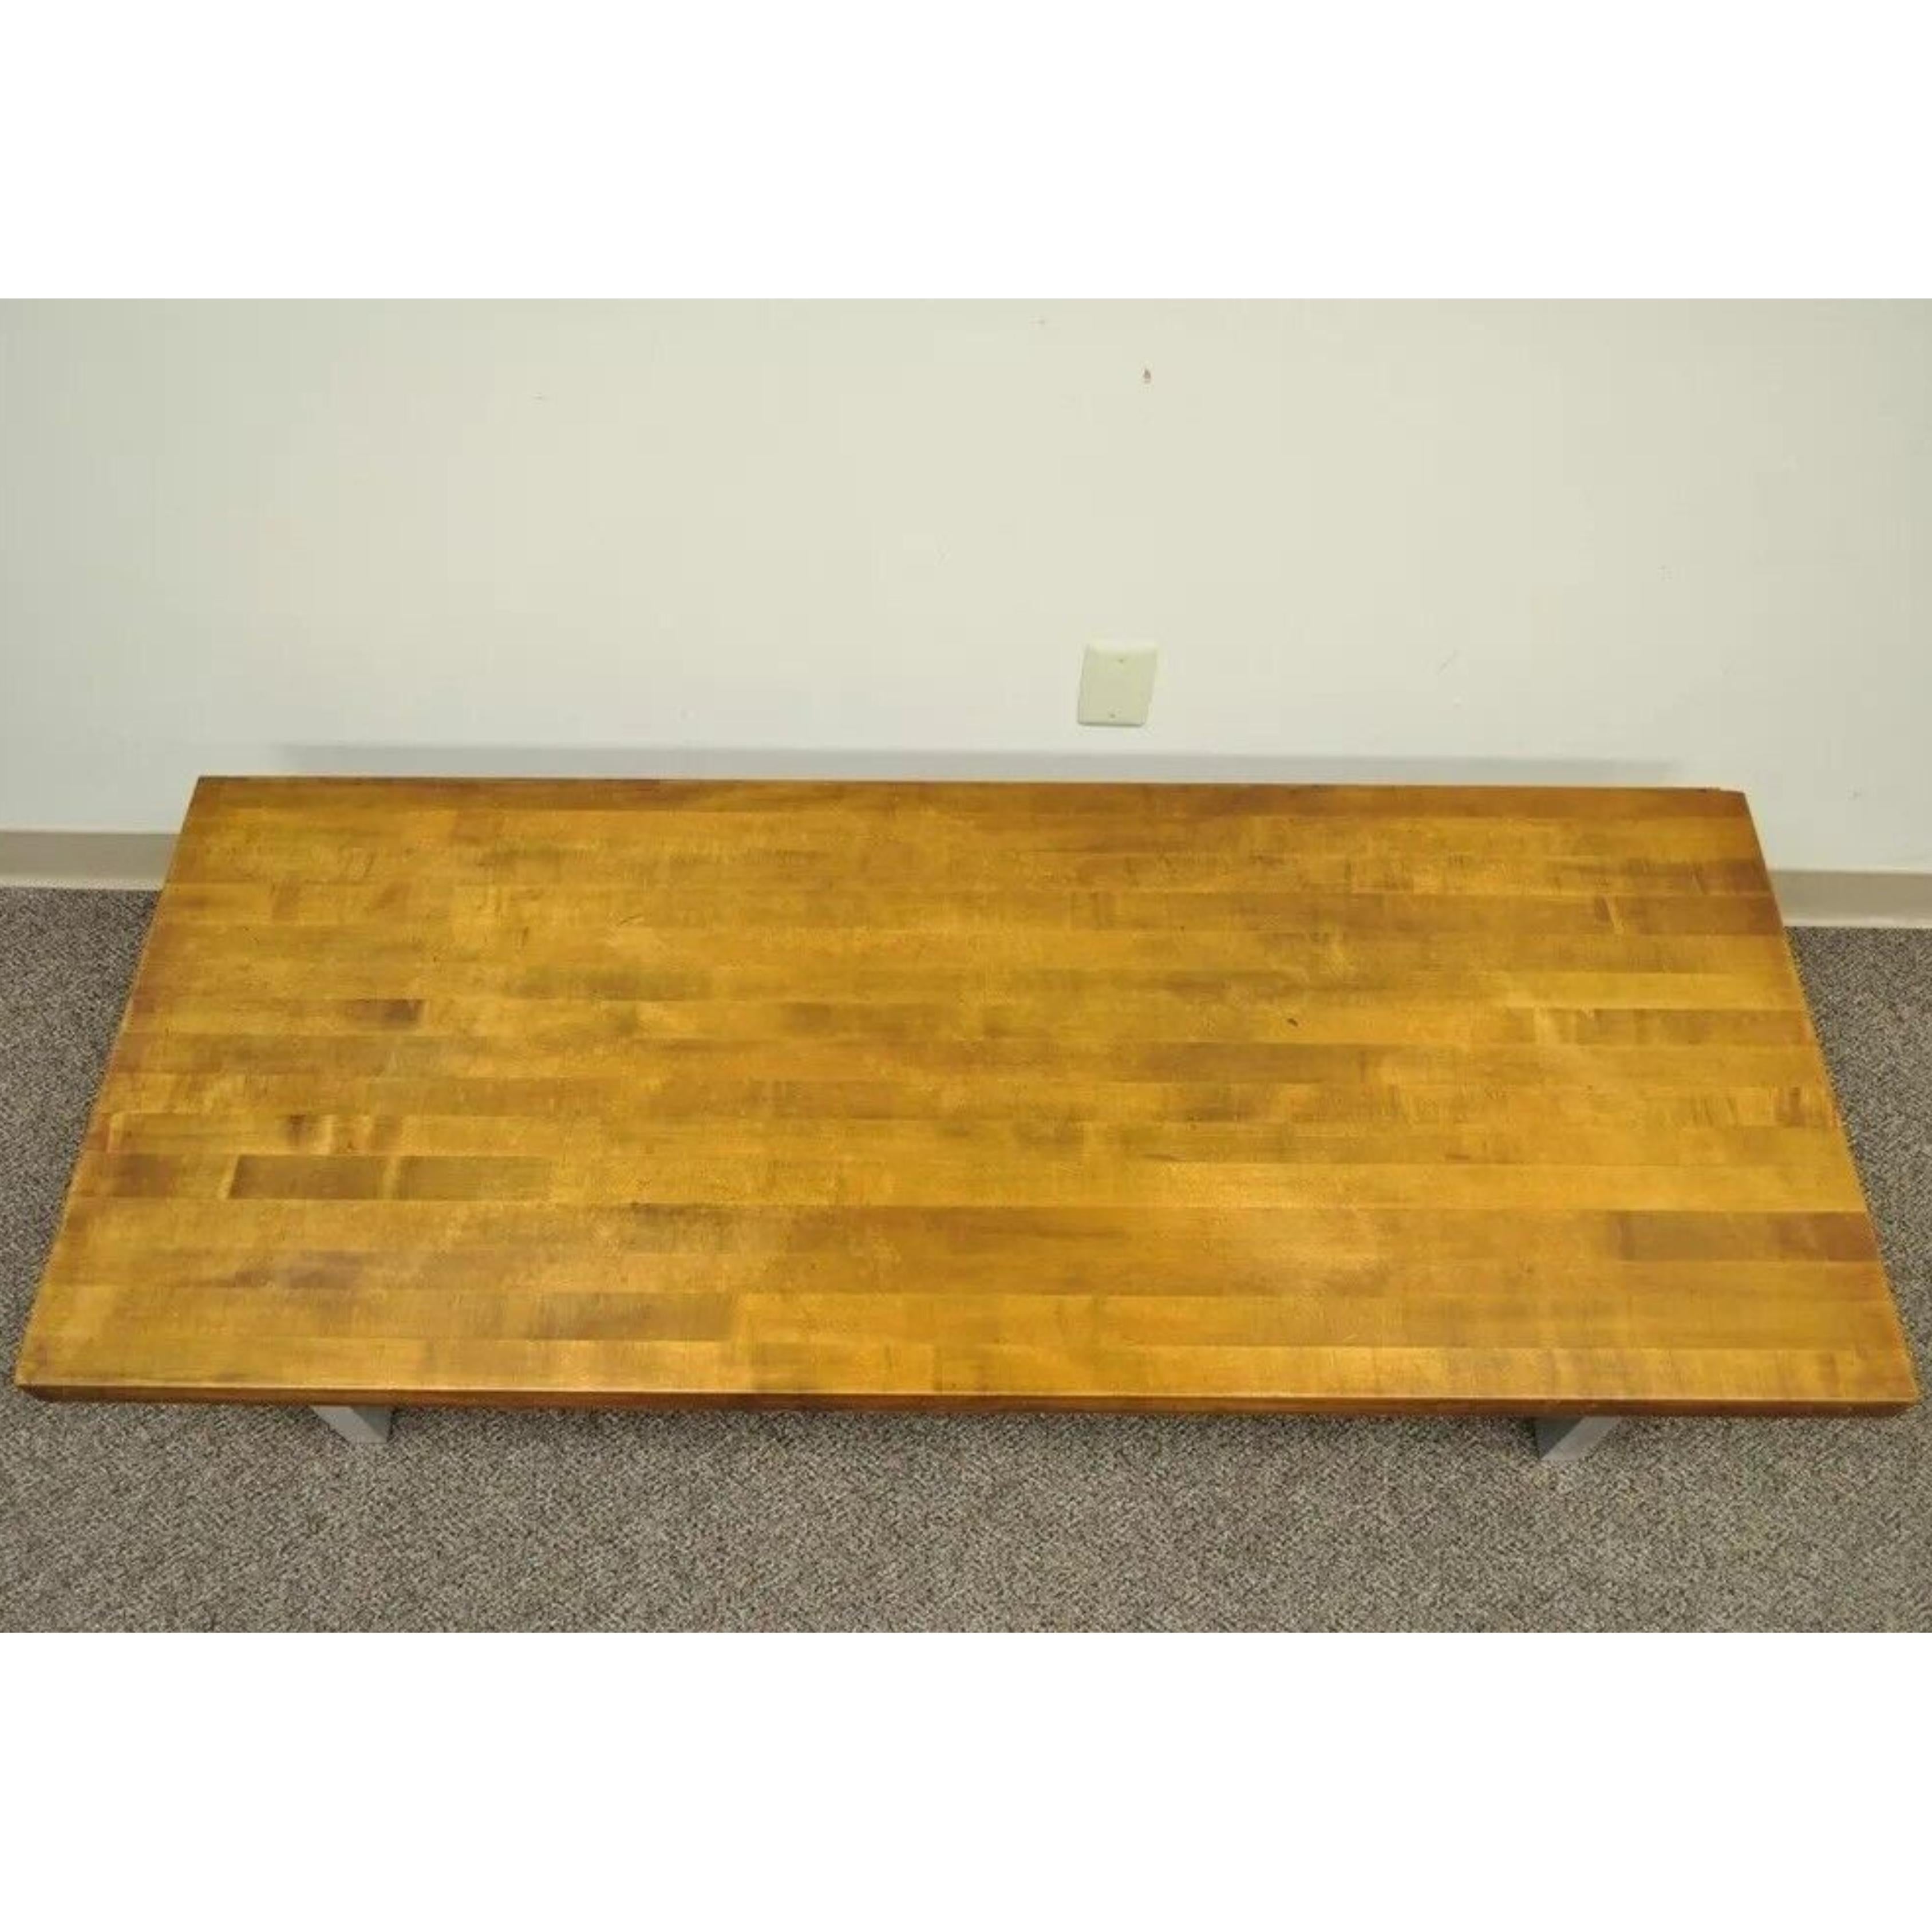 Vintage Industrial Modern Reclaimed Butcher Block Aluminum Base Coffee Table In Good Condition For Sale In Philadelphia, PA